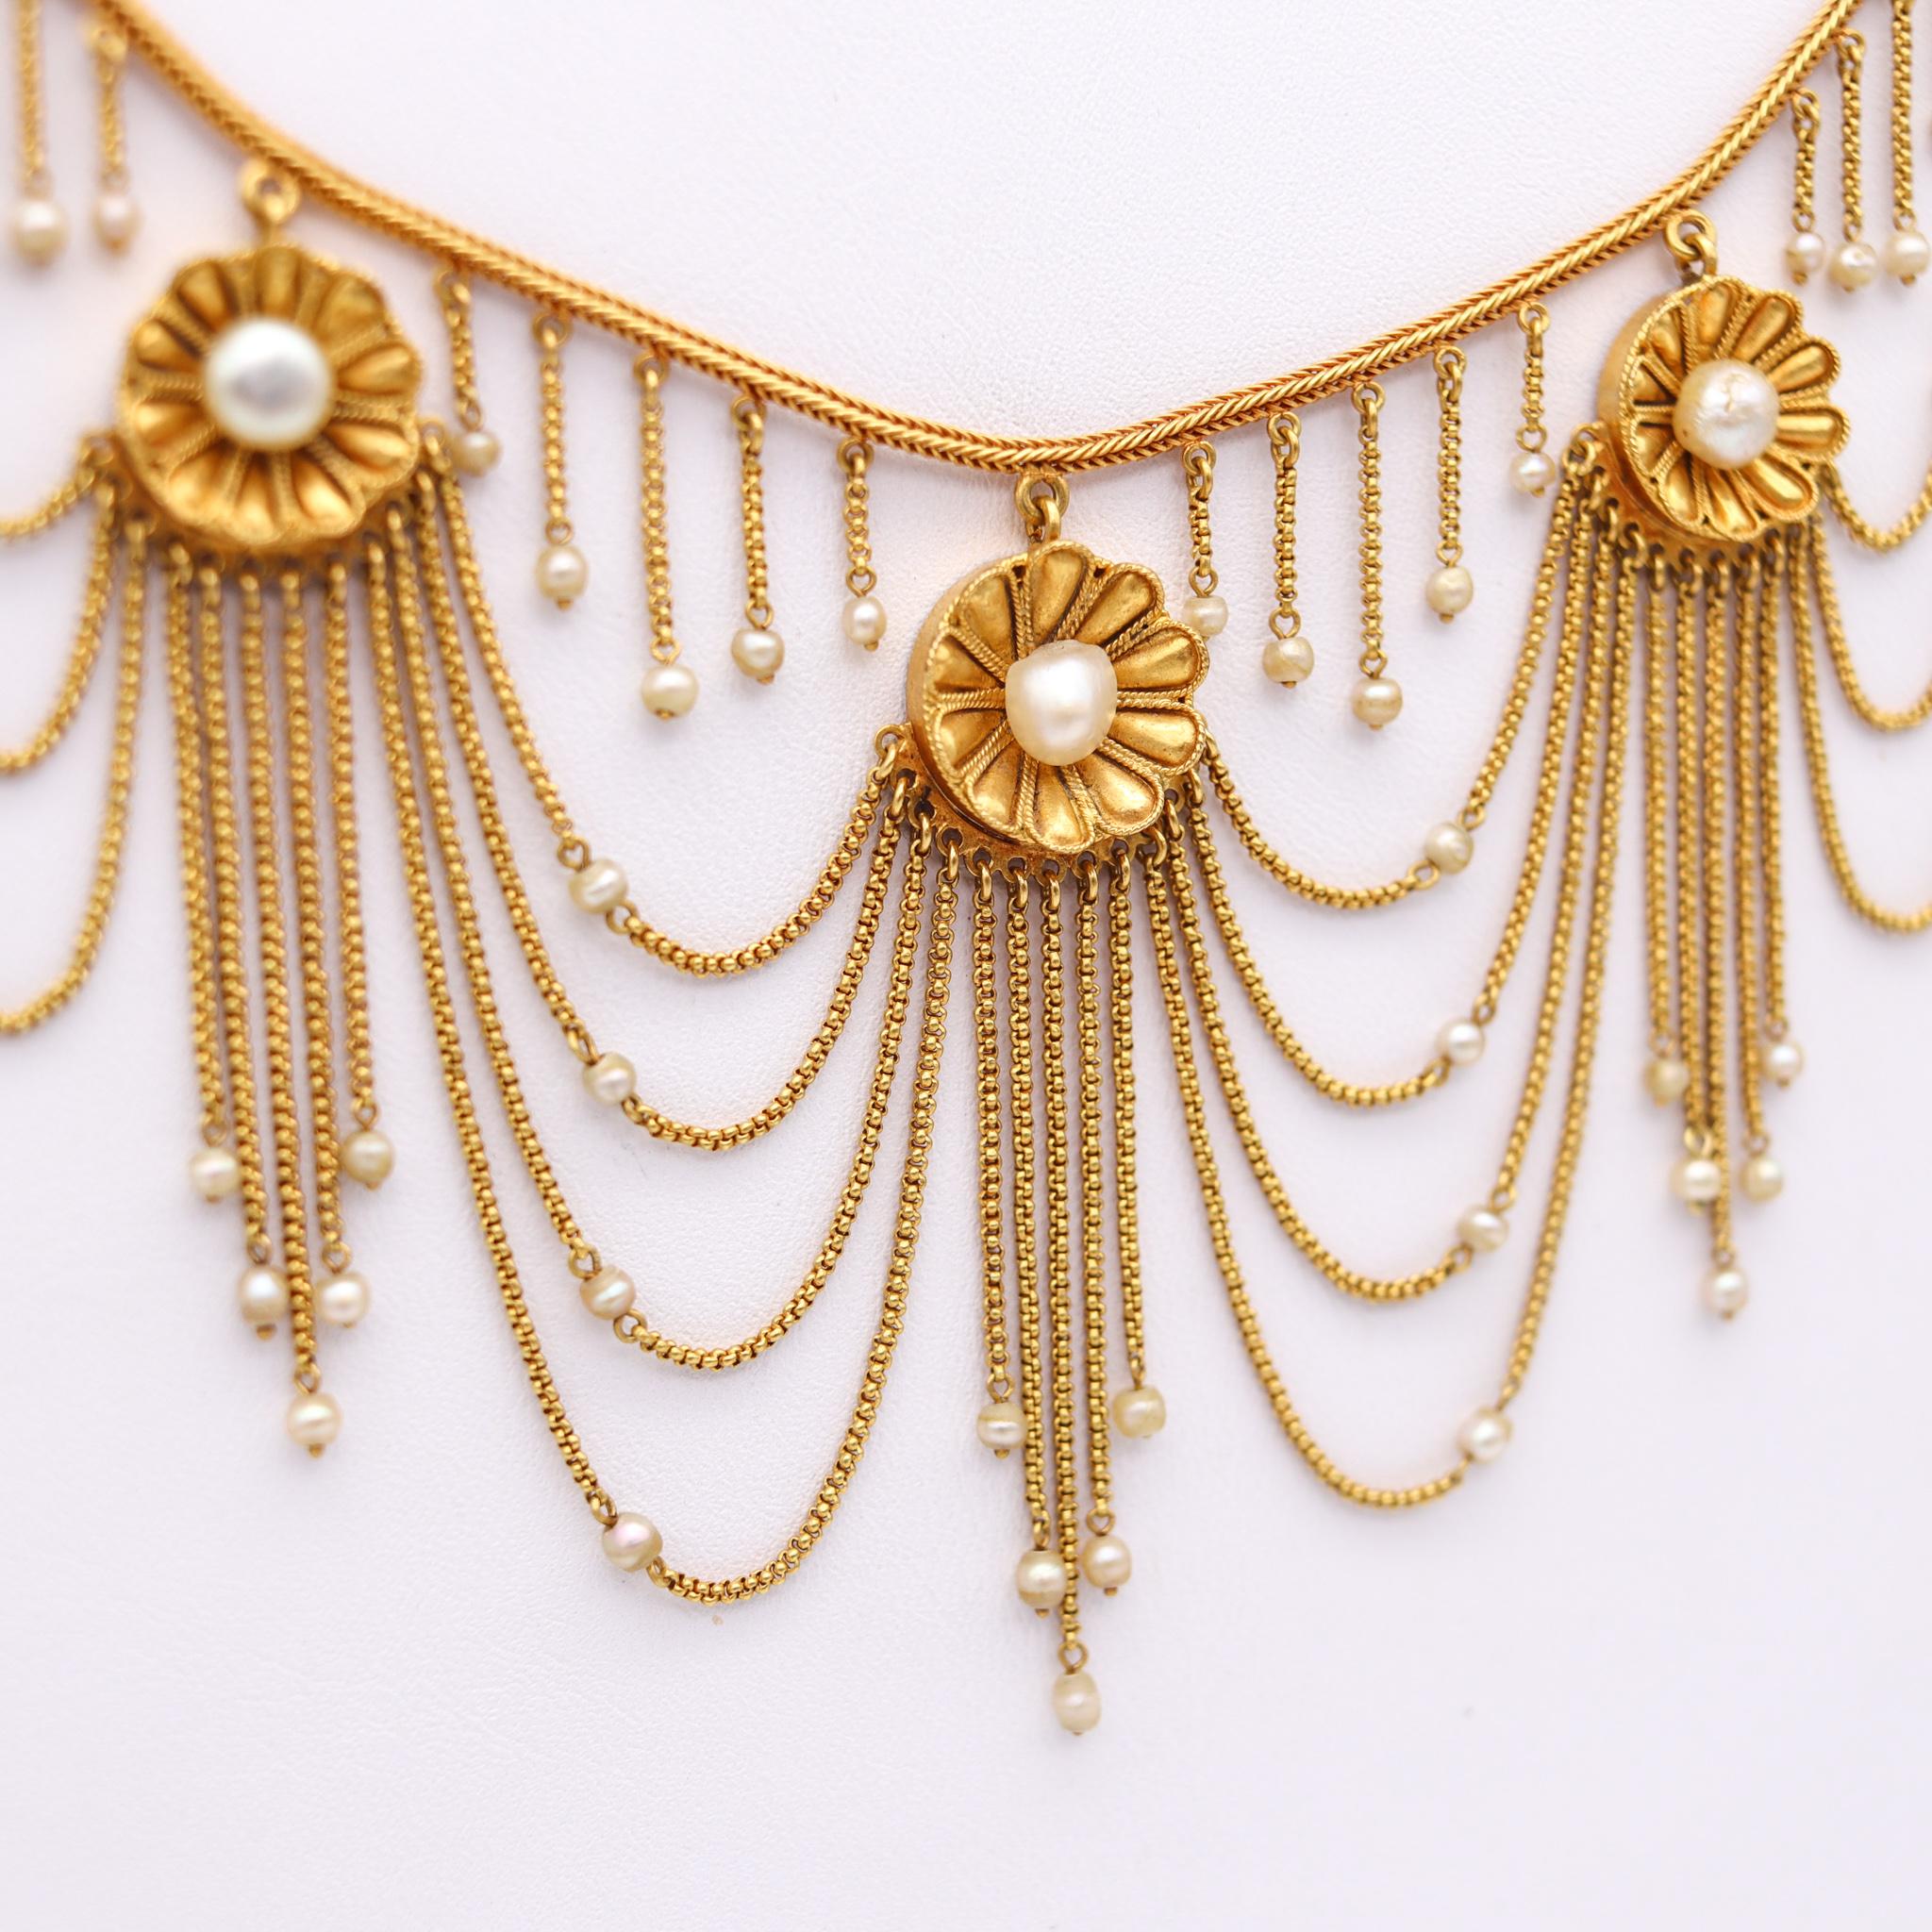 Round Cut Victorian 1870 Gorgeous Festoon Fringe Necklace 18Kt Yellow Gold Natural Pearls For Sale